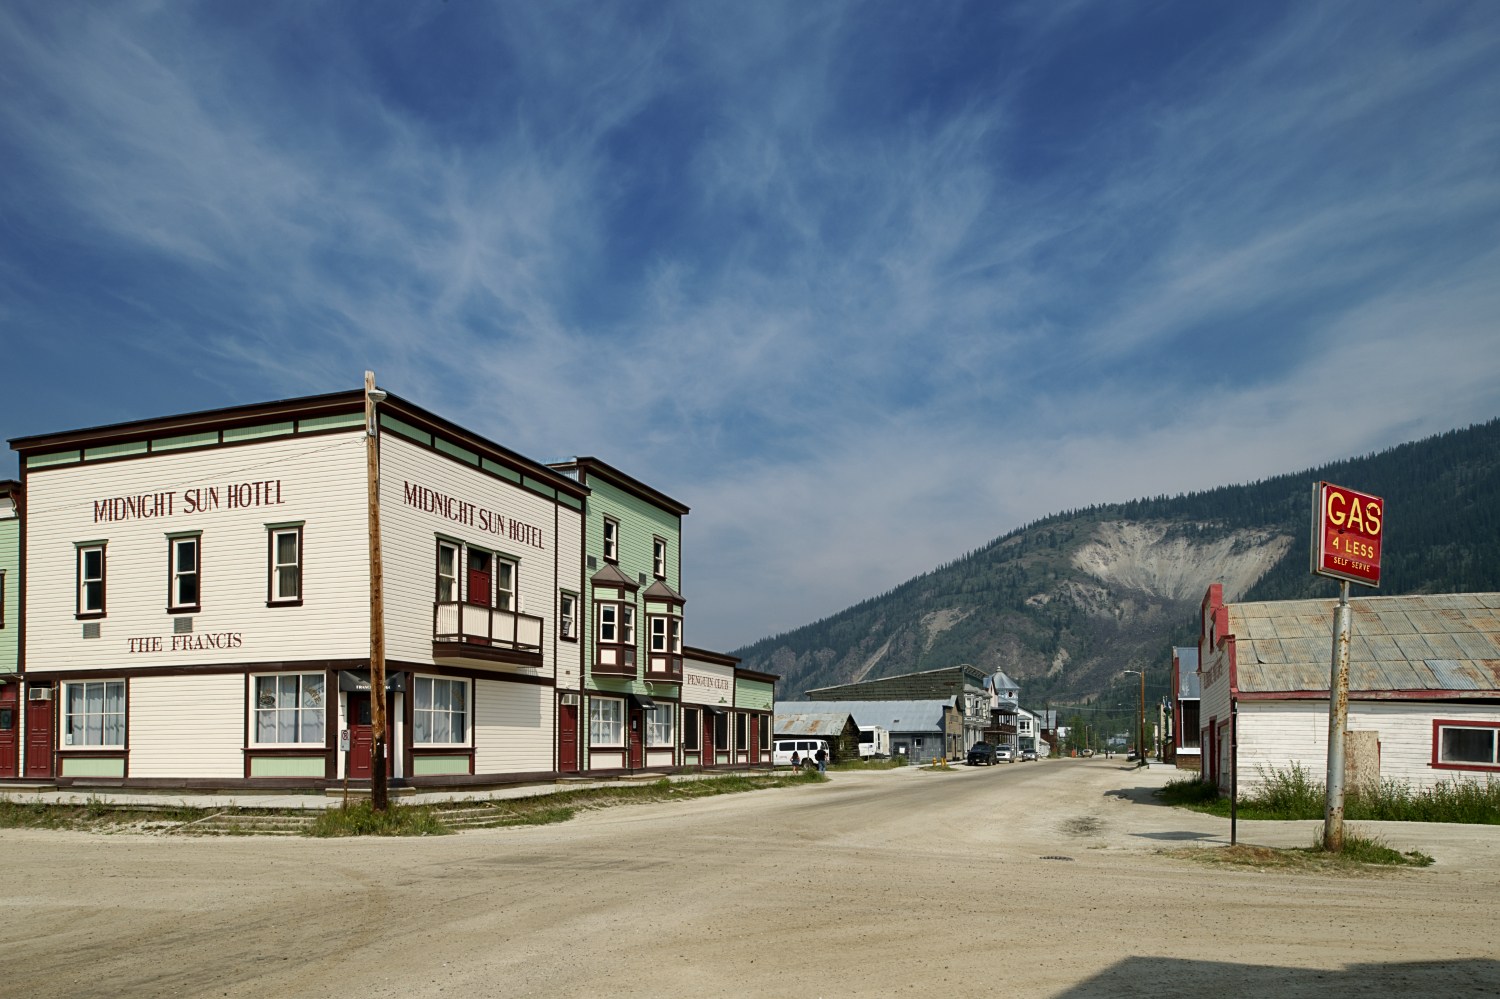 A streetscape of a wide, dirt street, with antiquated wooden buildings on either side and mountains in the background.